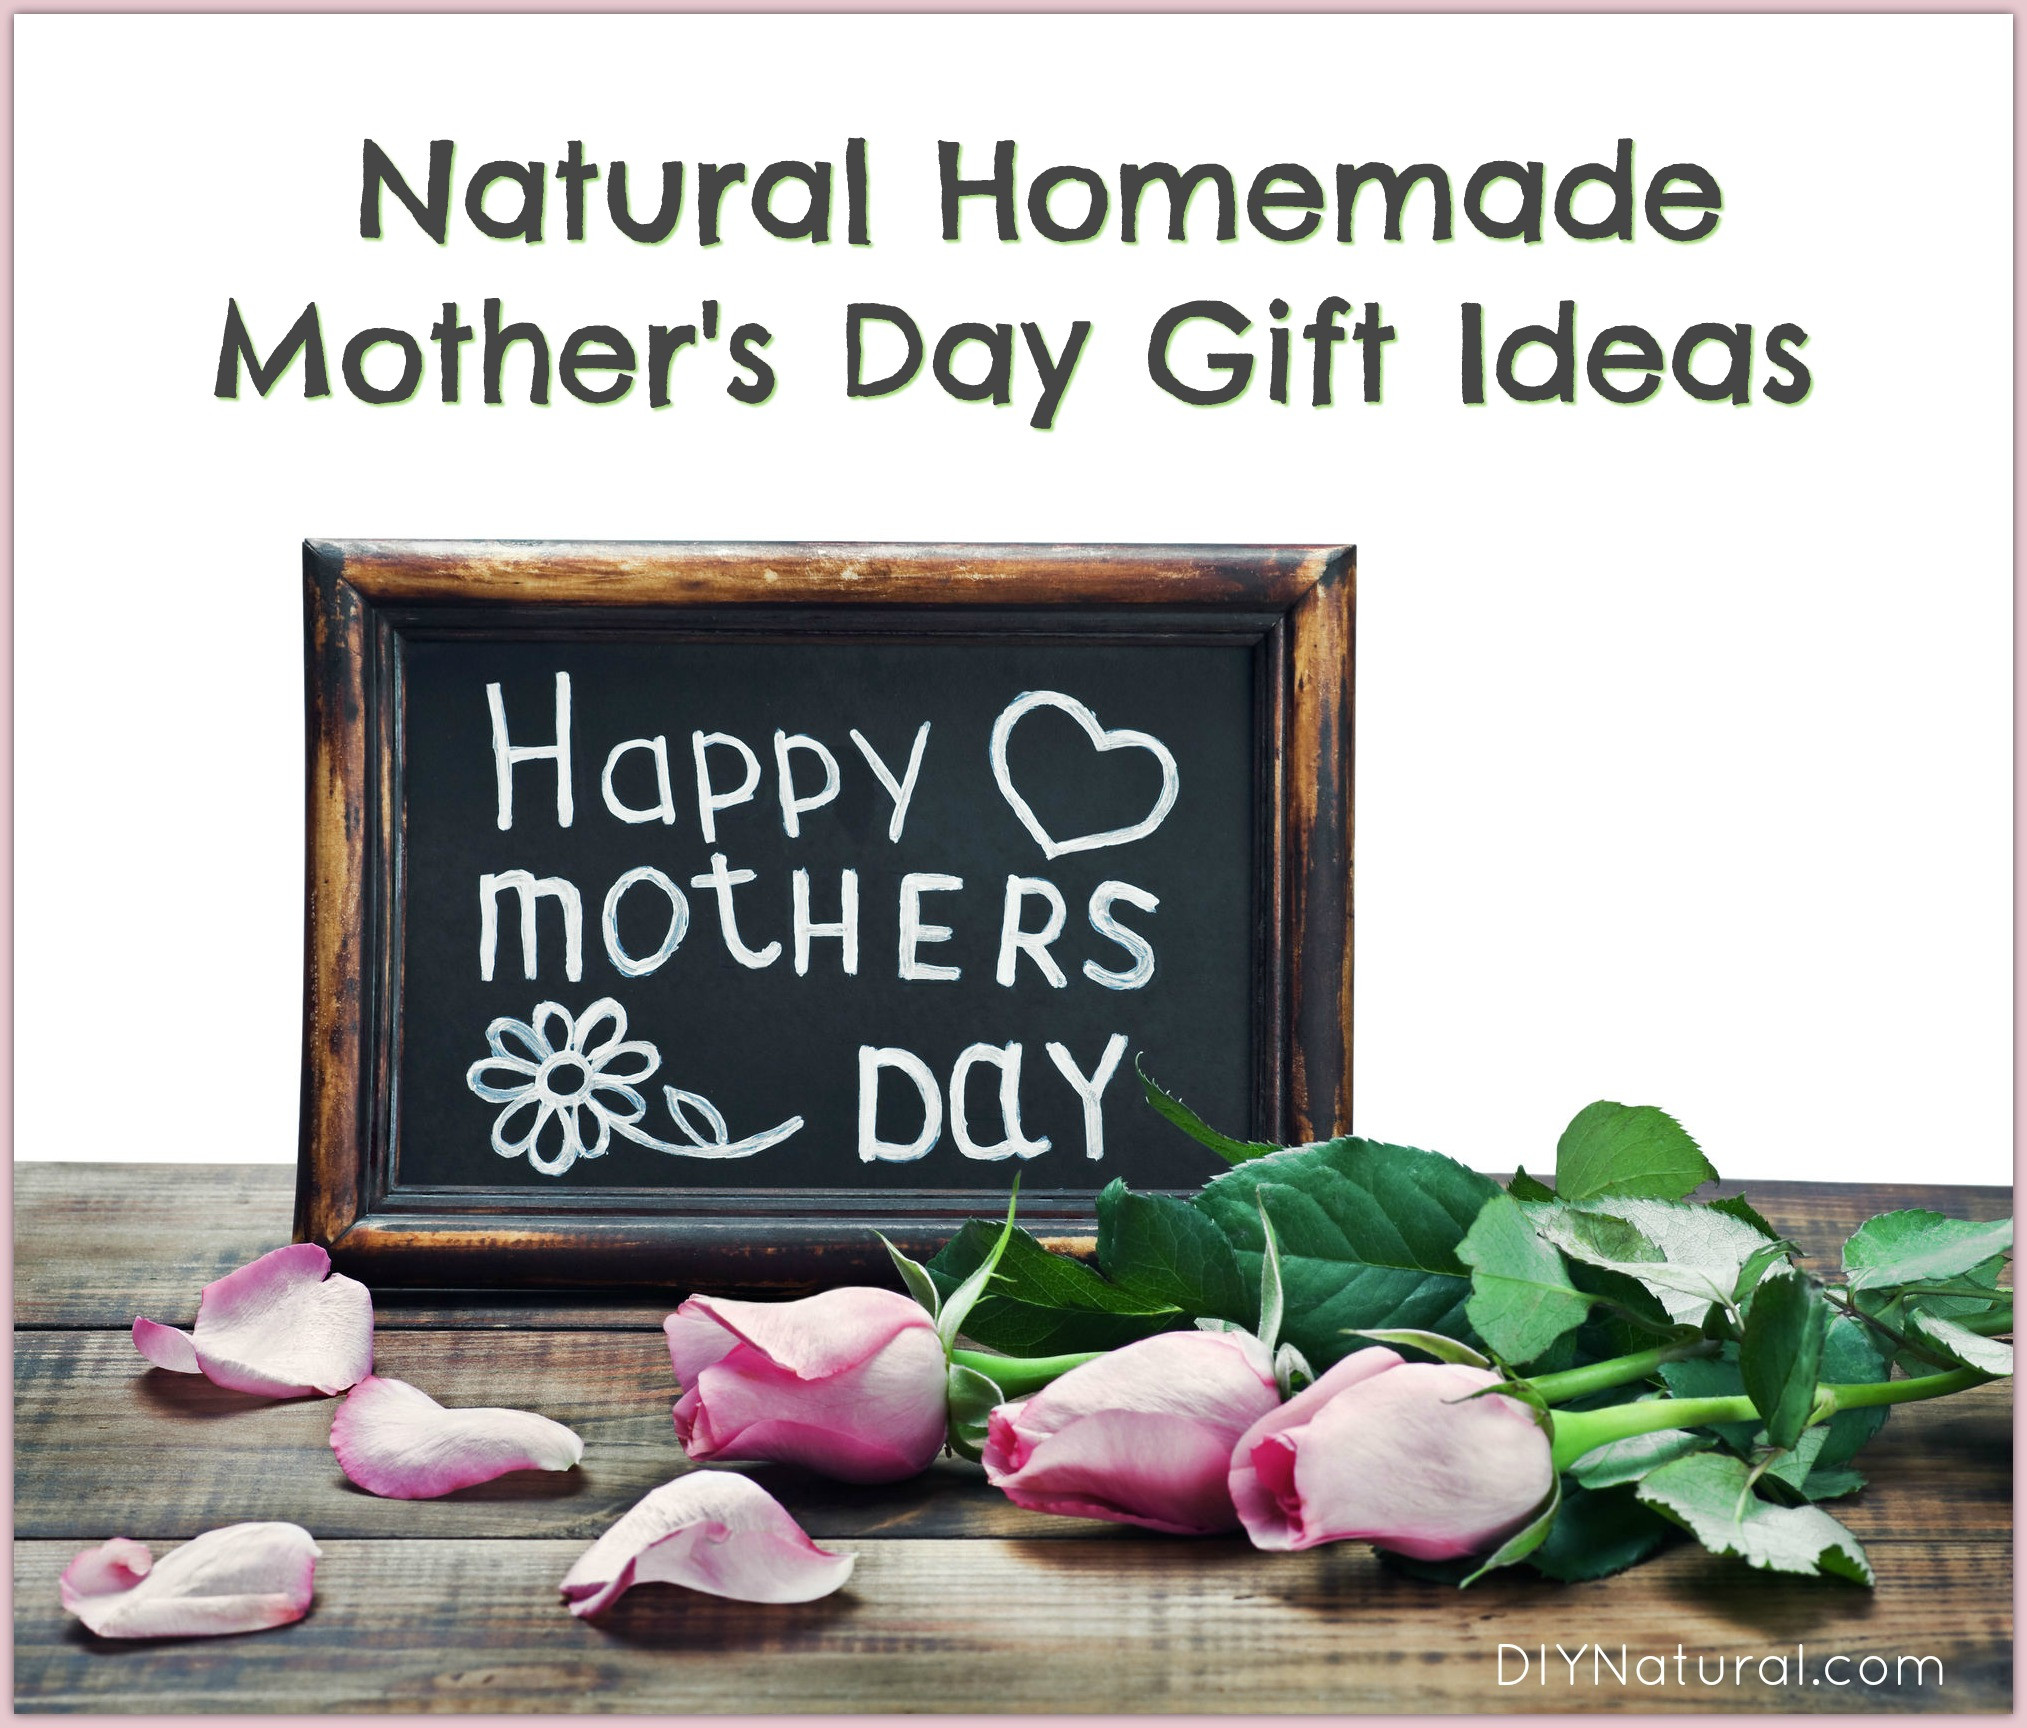 Homemade Mother's Day Gifts
 Natural Homemade Mother s Day Gifts To Give This Year